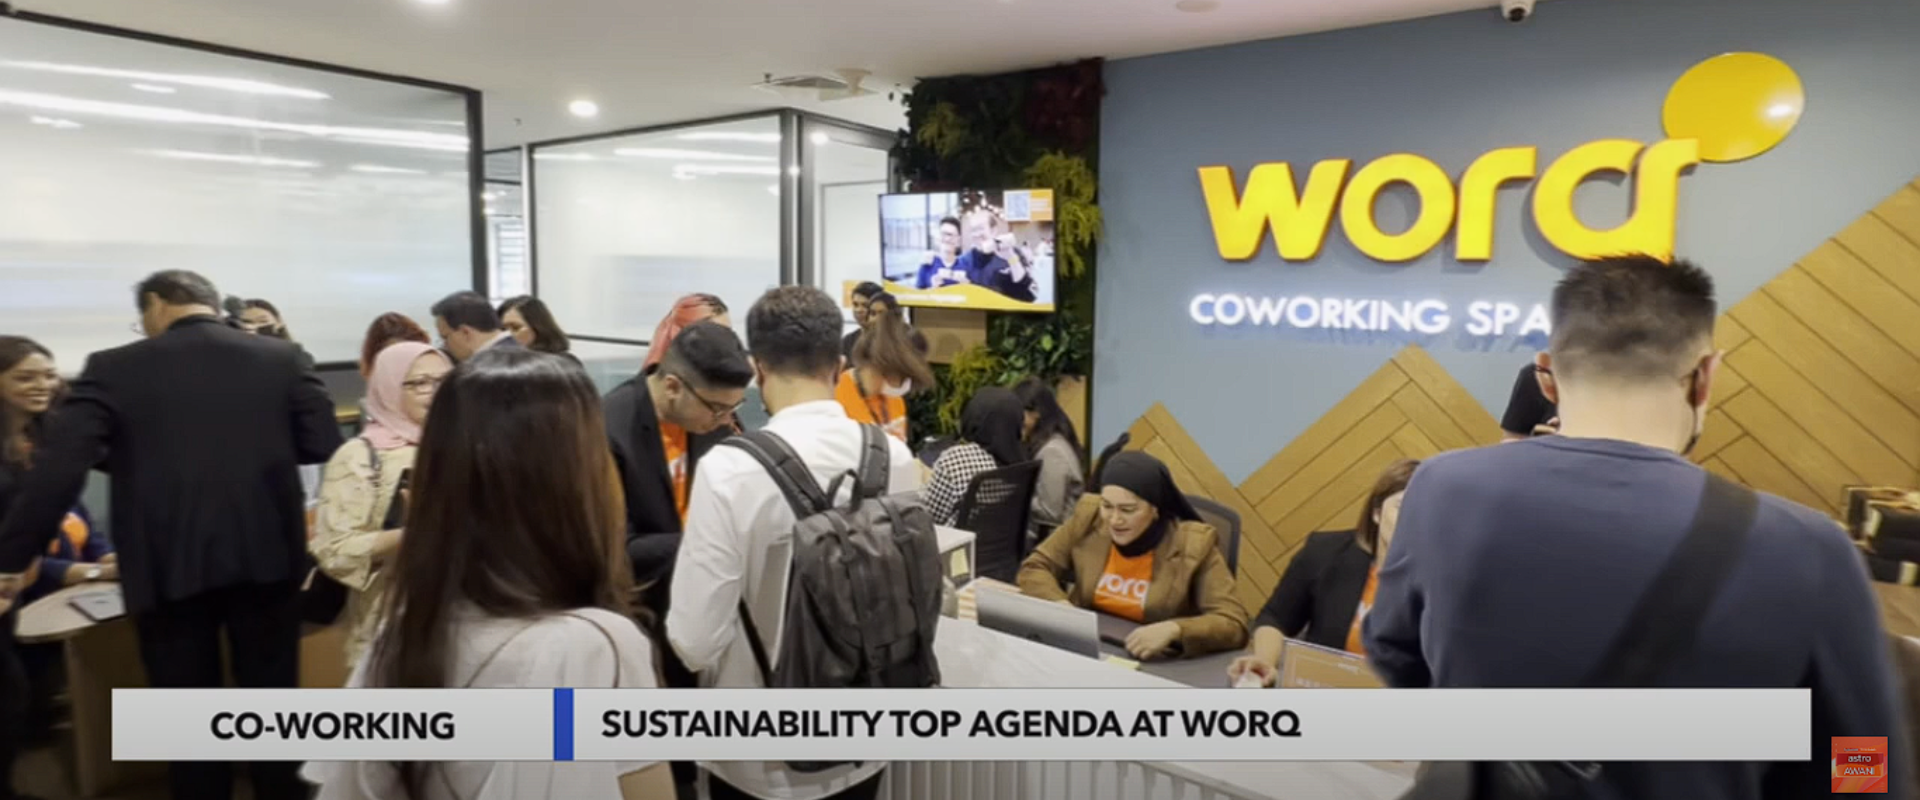 Co-Working | Sustainability top agenda at WORQ